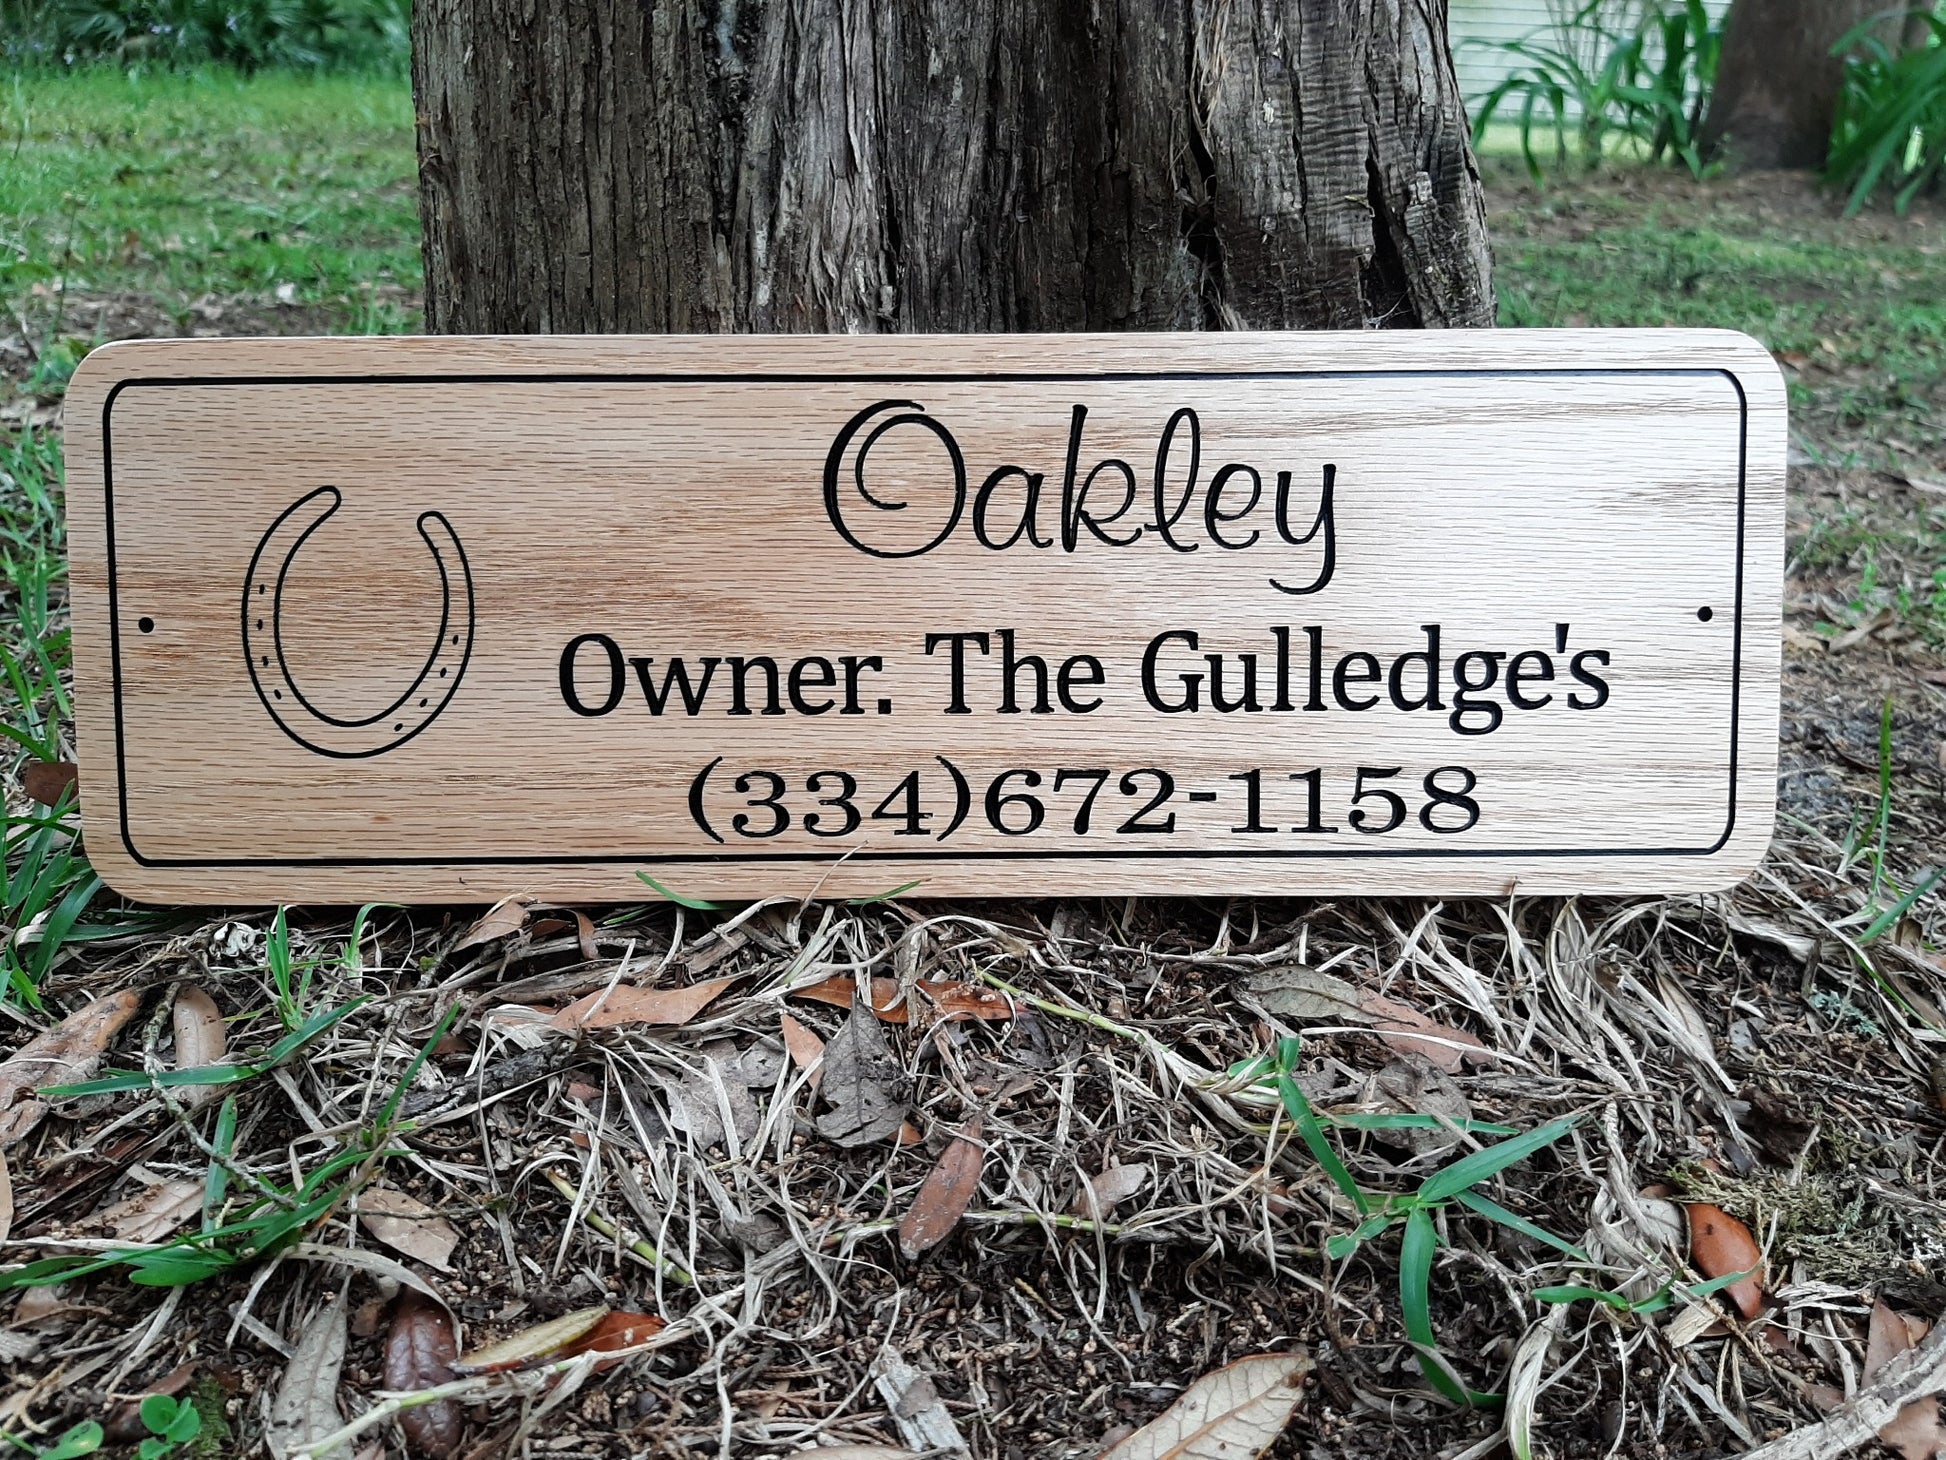 red oak wooden horse stable name plaque with owners name and phone number made in the USA.